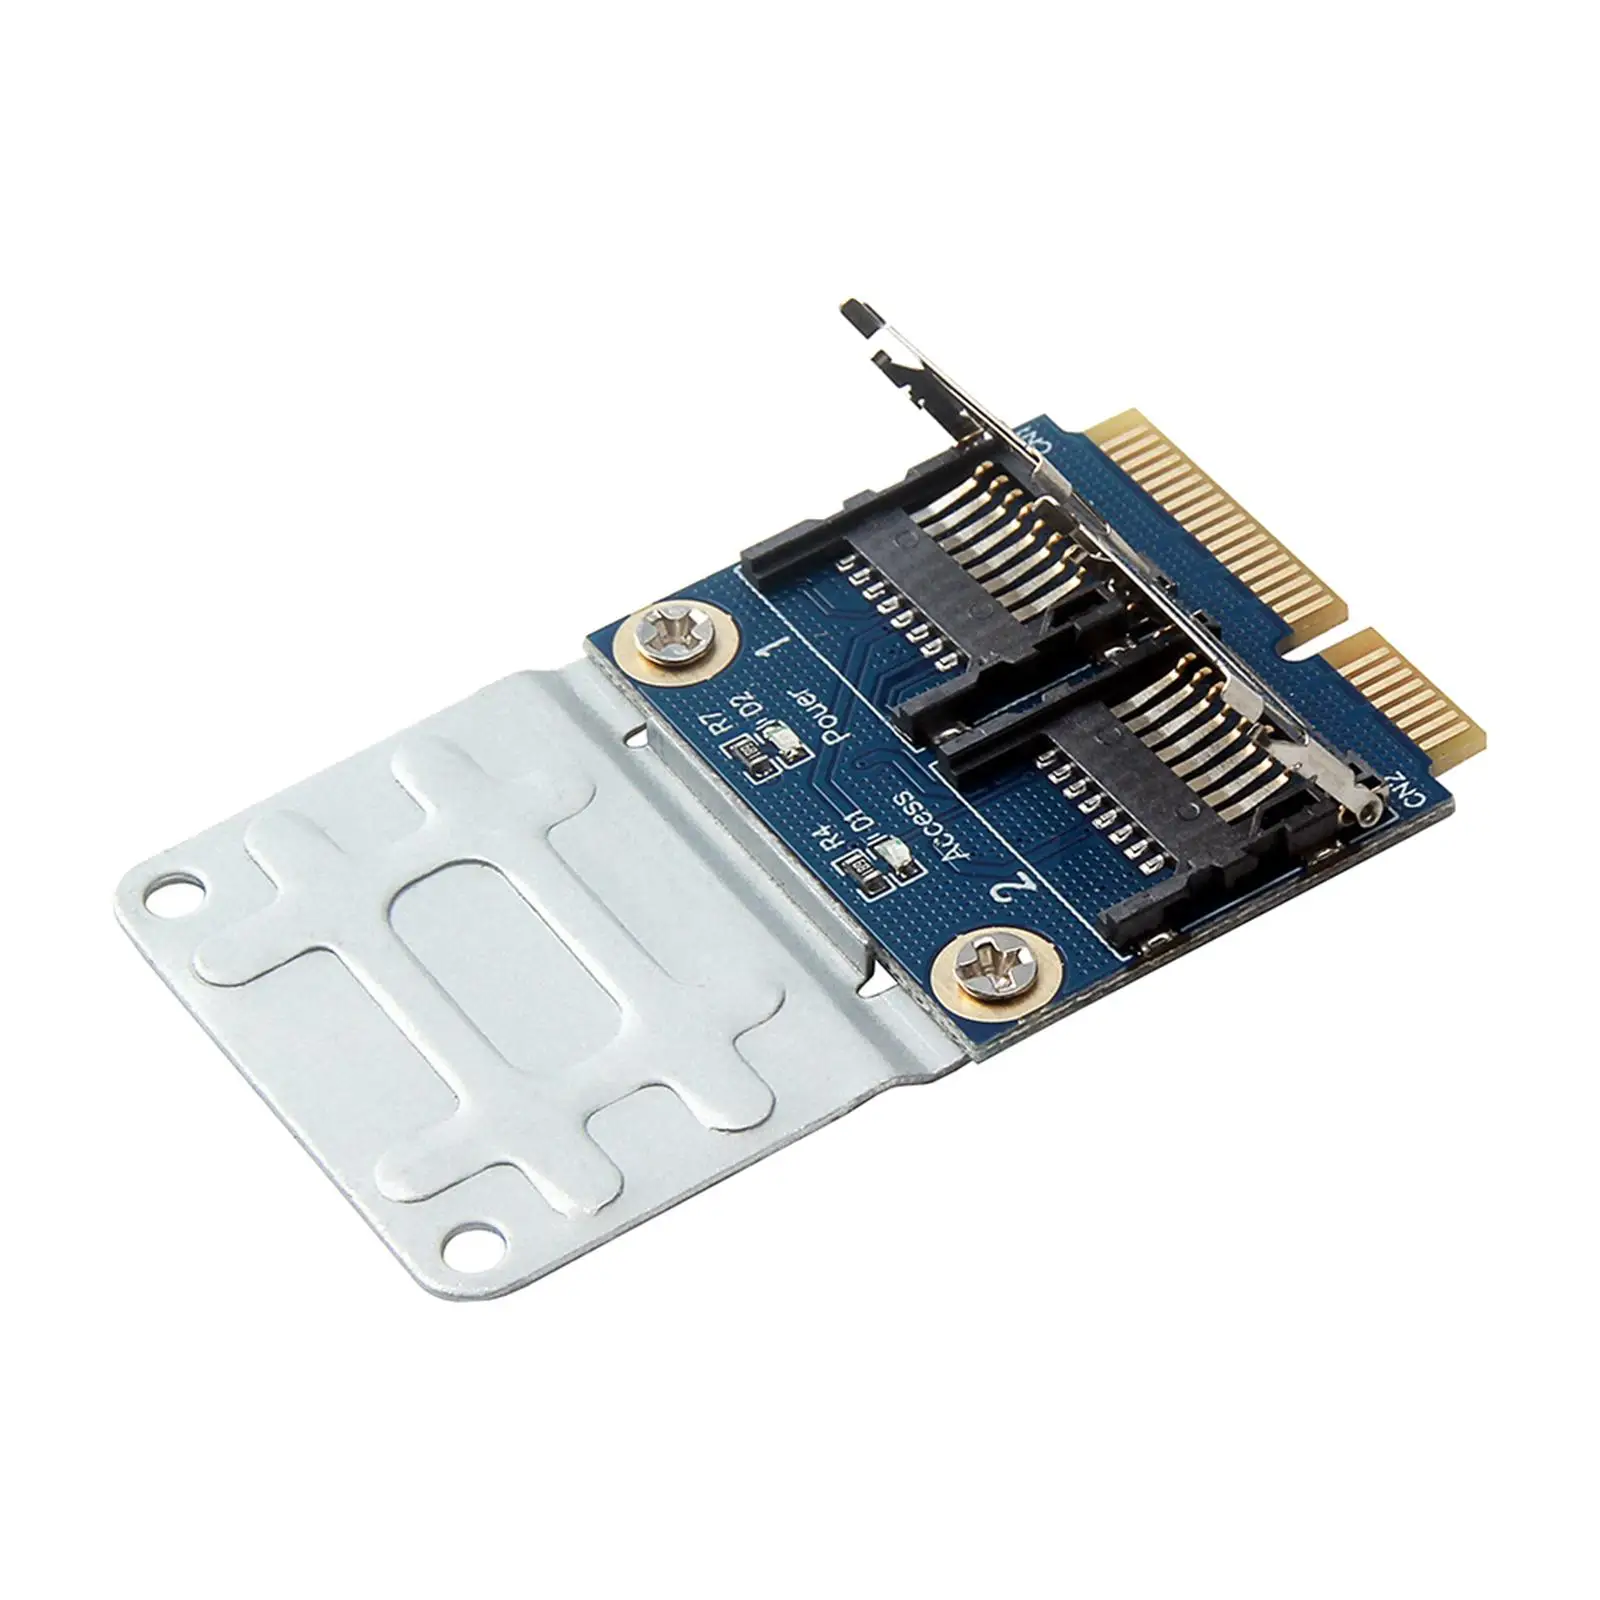 2 Ports SSD HDD Mpcie to 2 Mini-Sdcards Mini Pci-E Adapter Durable Laptop Dual SDHC SDXC TF to Mini PCIe 2 SSD HDD